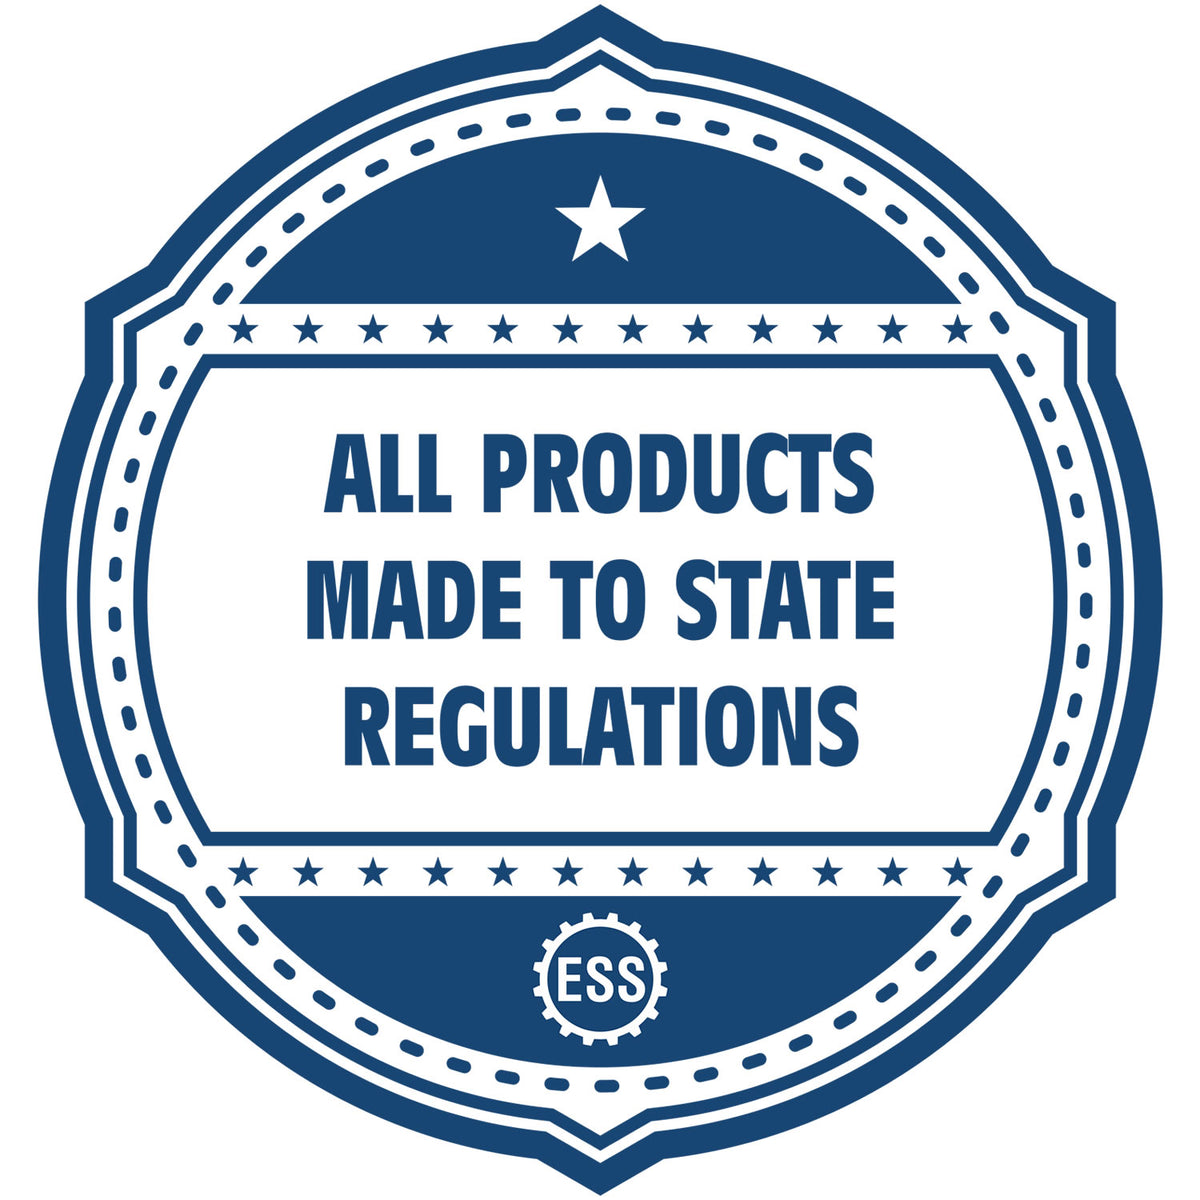 An icon or badge element for the State of Maine Extended Long Reach Engineer Seal showing that this product is made in compliance with state regulations.